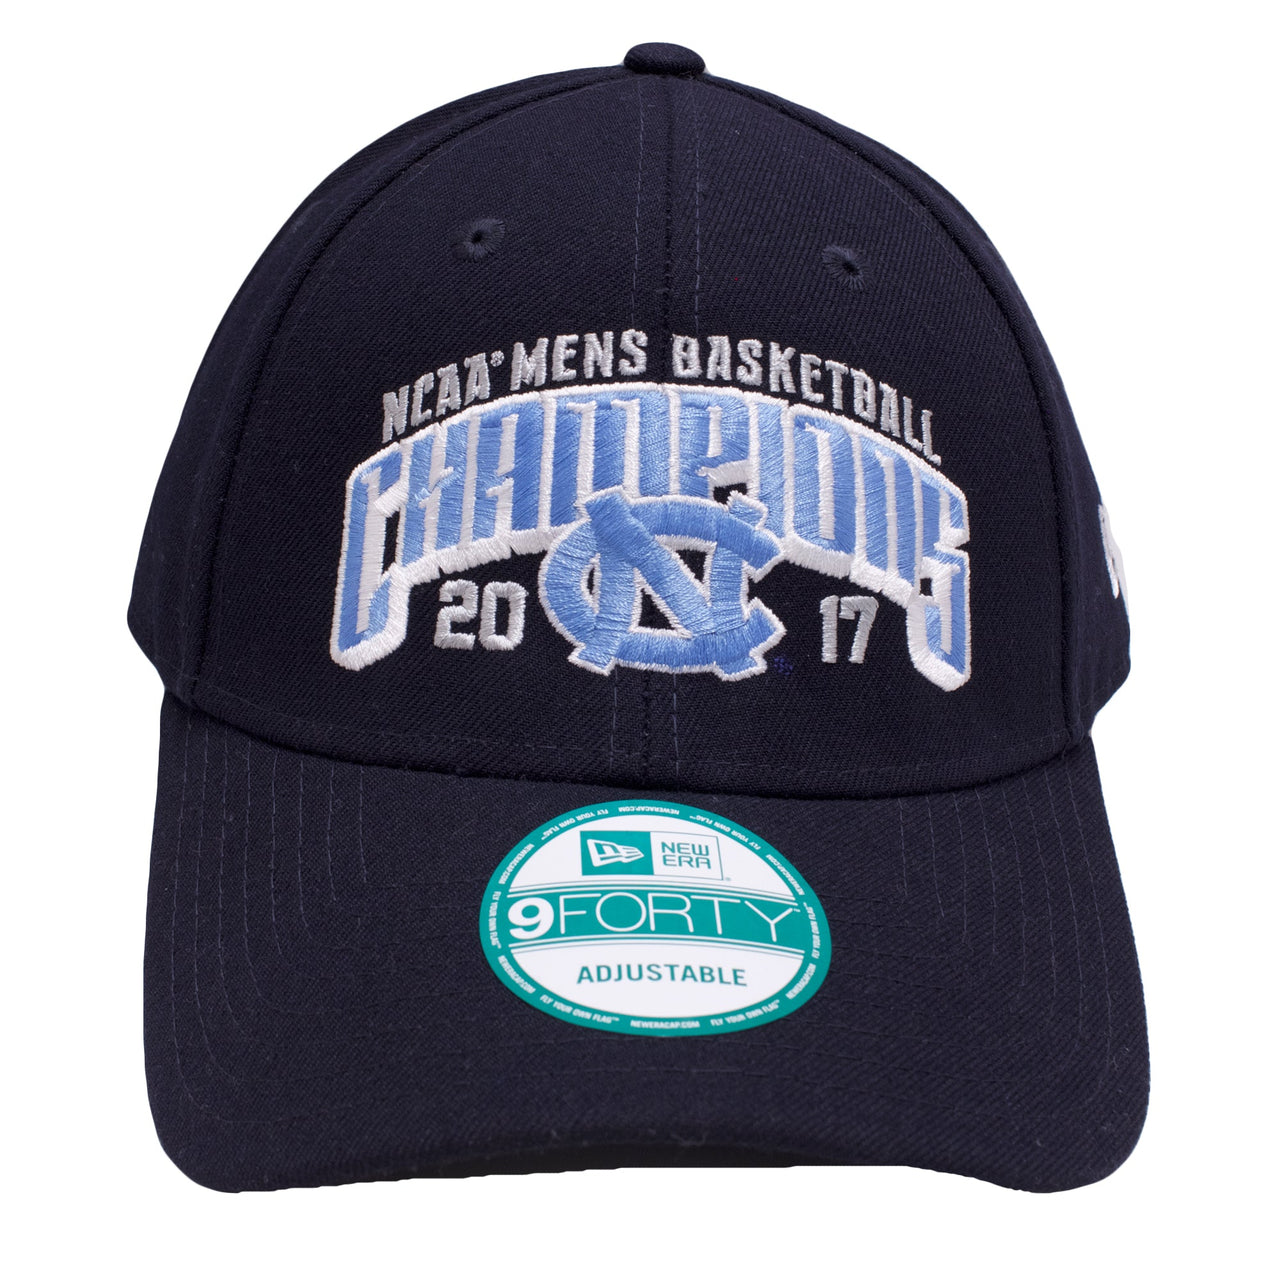 the NCAA Men's Basketball 2017 Championship dad hat is navy blue with a white and light blue logo embroidered on the front